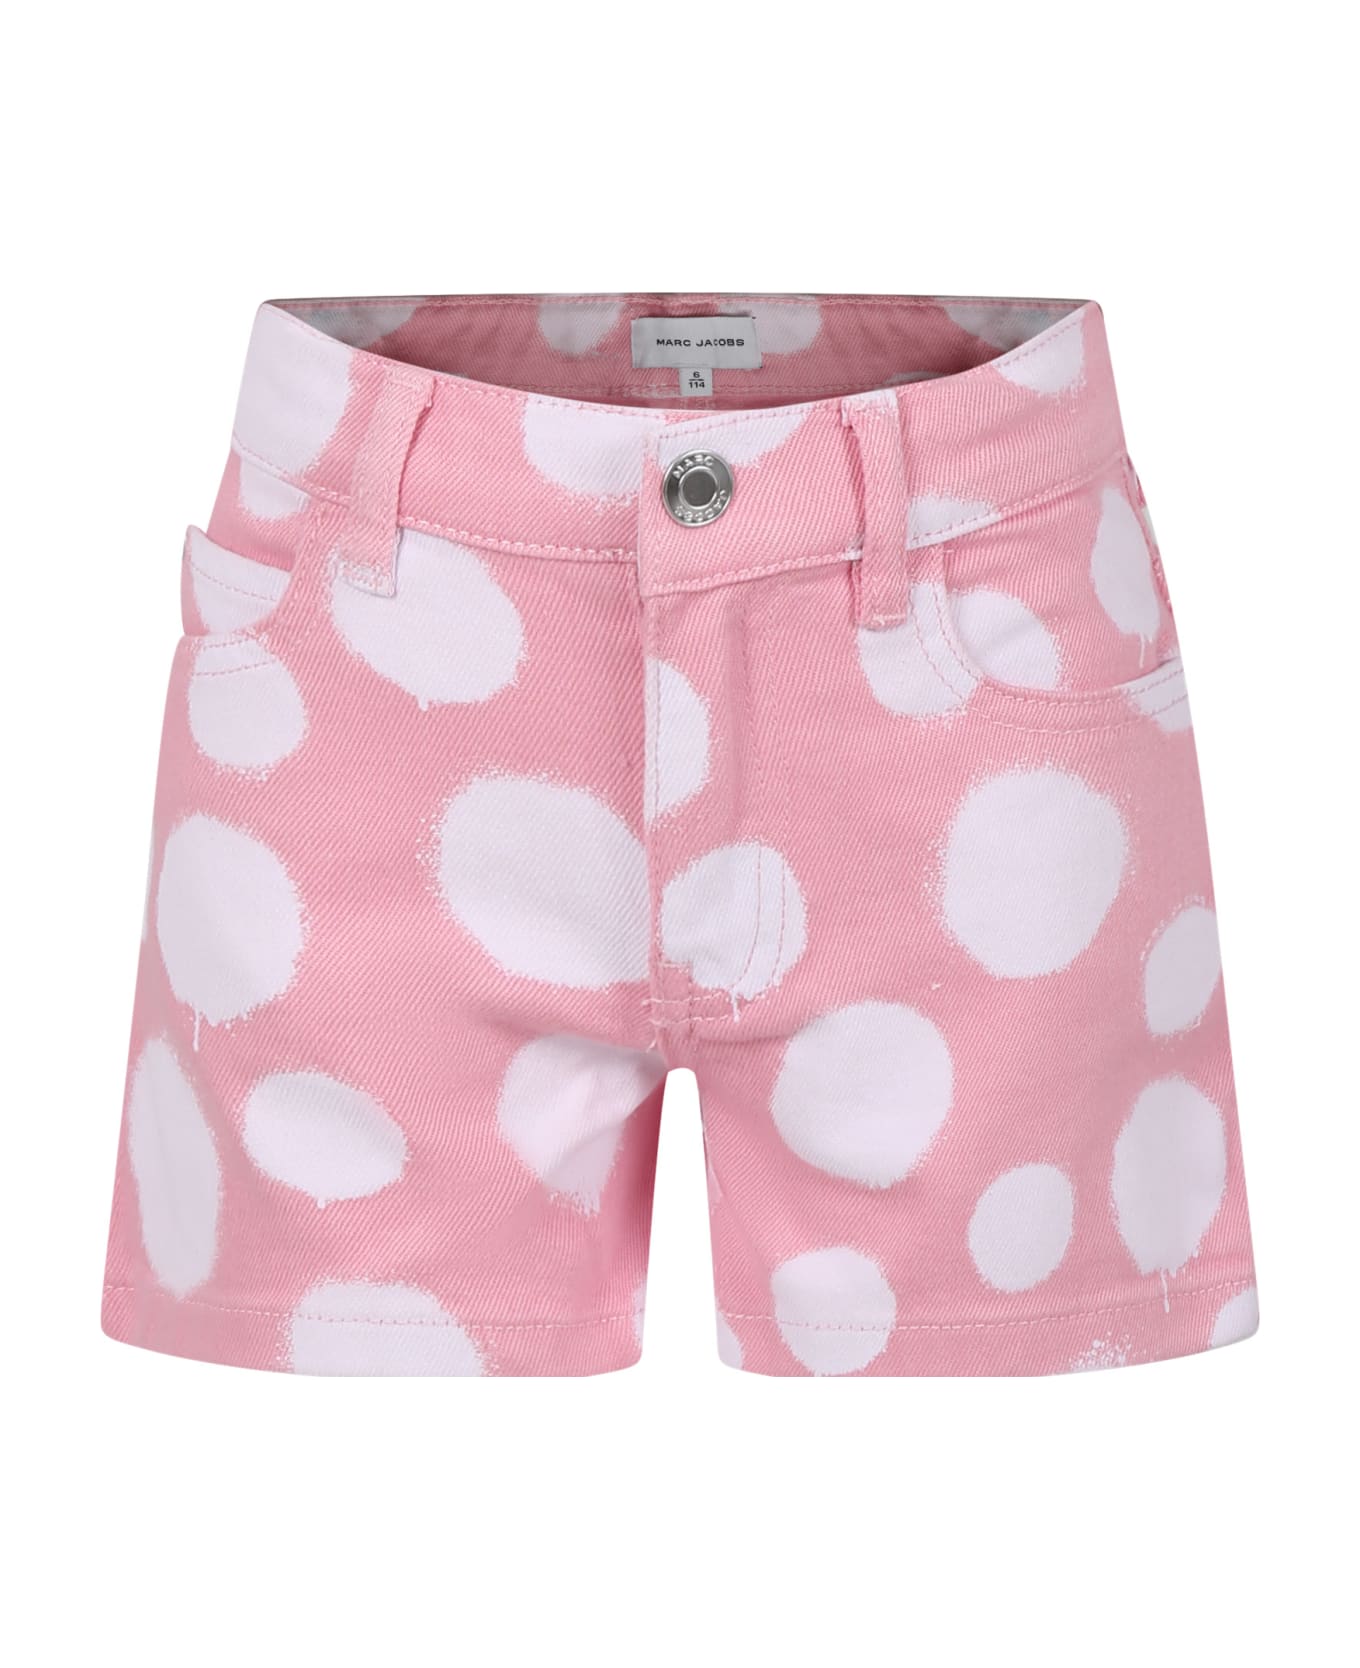 Marc Jacobs Pink Shorts For Girl With All-over Polka Dots - Rosa